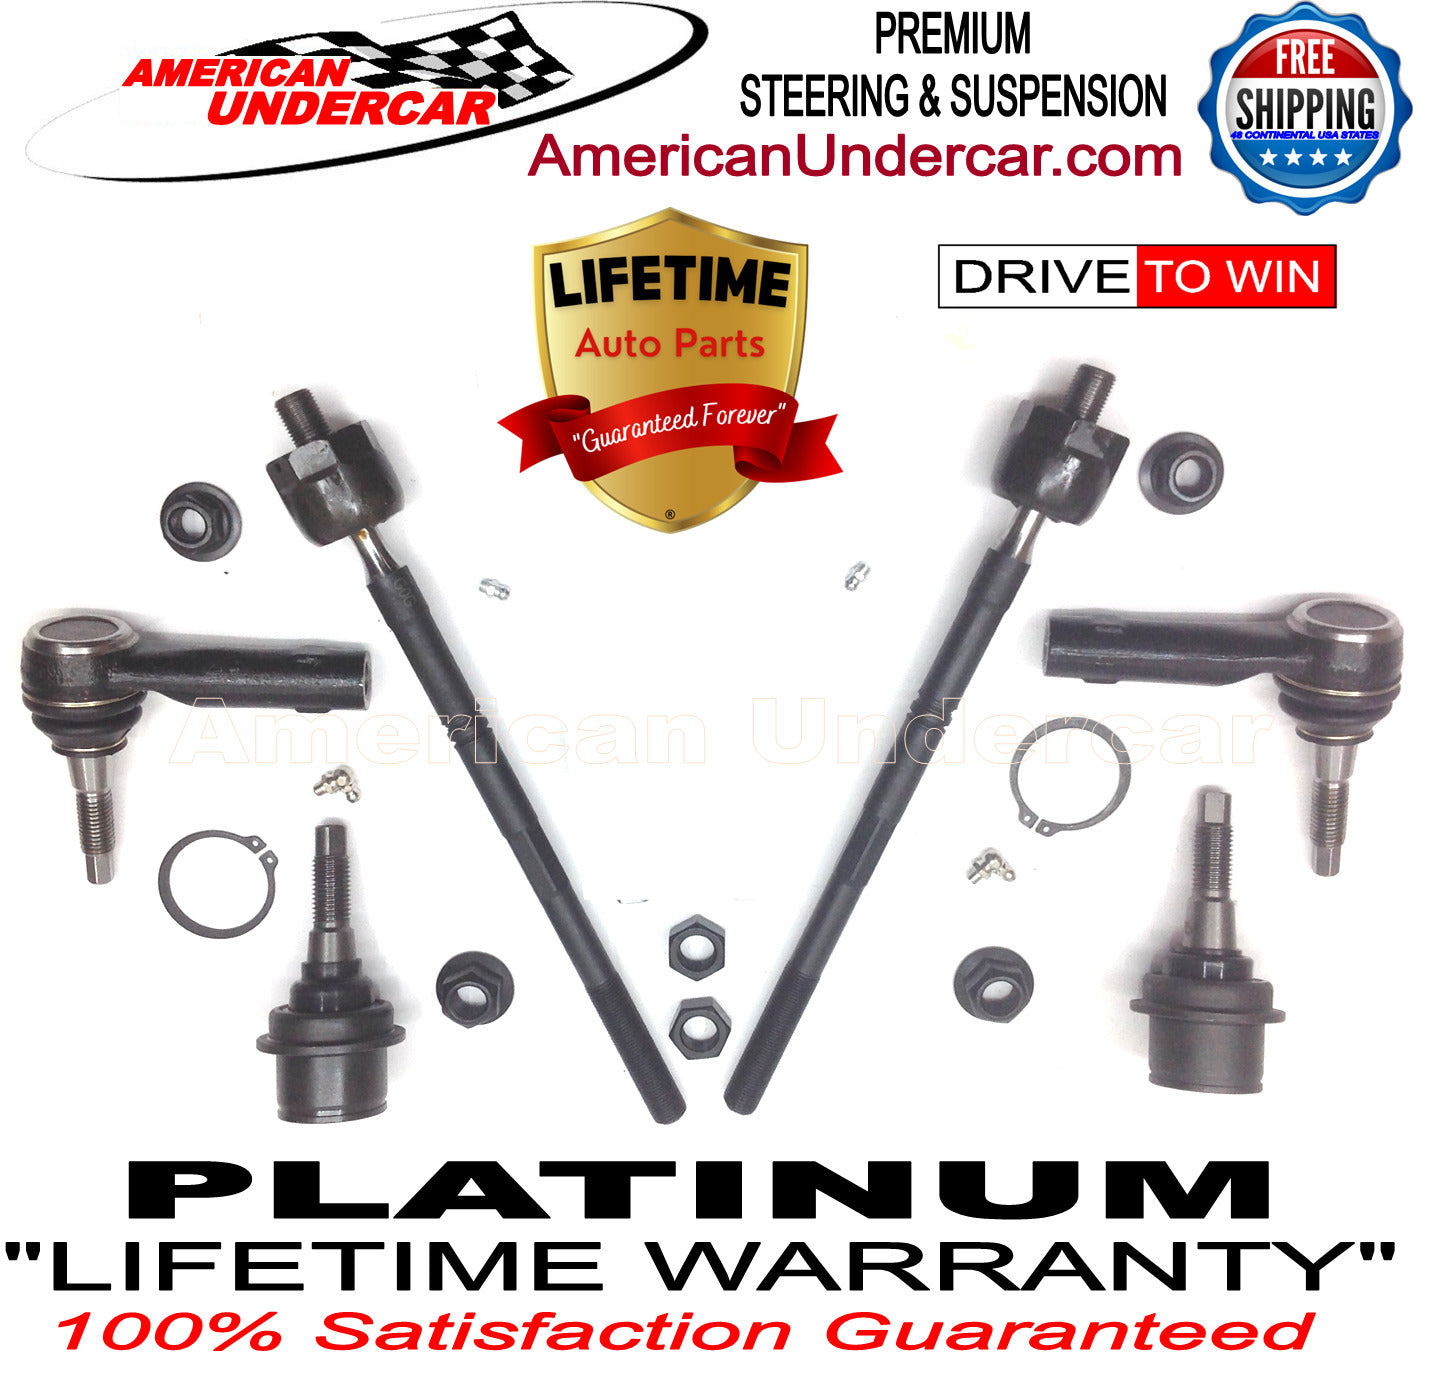 Lifetime Lower Ball Joints Tie Rod Steering Kit for 2009-2014 Ford F150 4x4